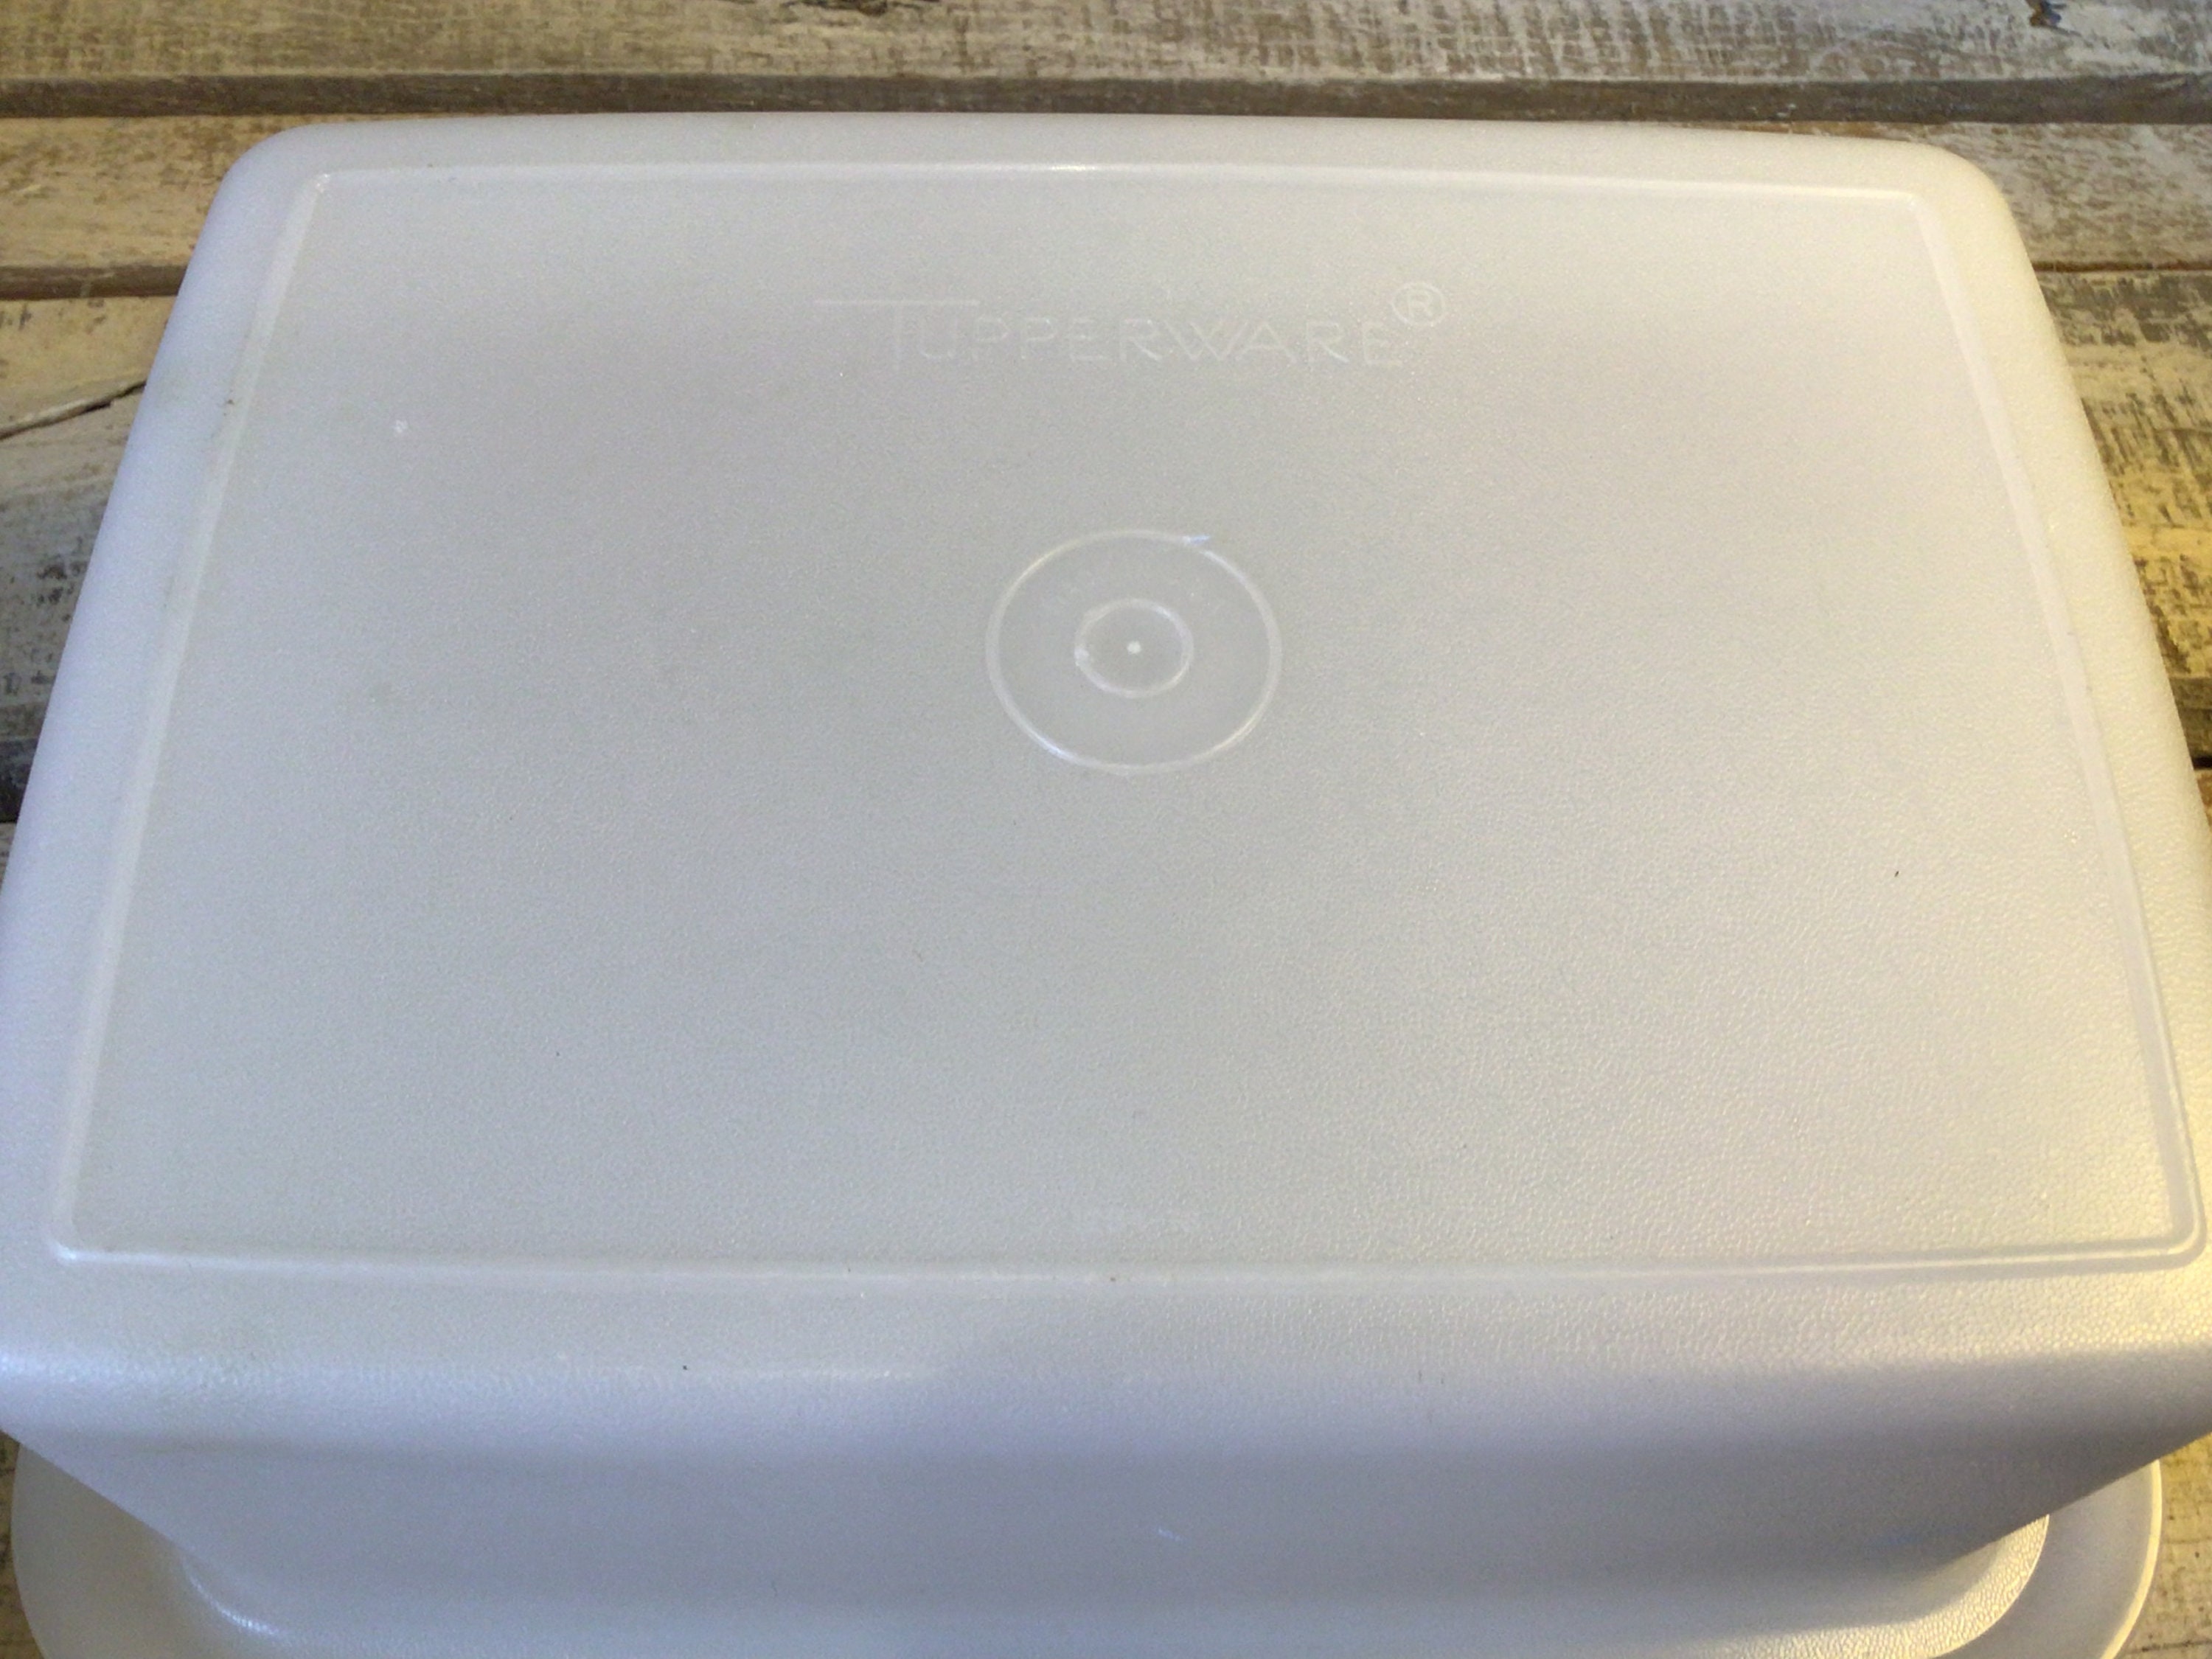 Tupperware Ice Cream Keeper, 484 486, Vintage Rectangular Container With Lid,  Freezer Food Storage, Retro 1960s Kitchen, Sheer Clear 